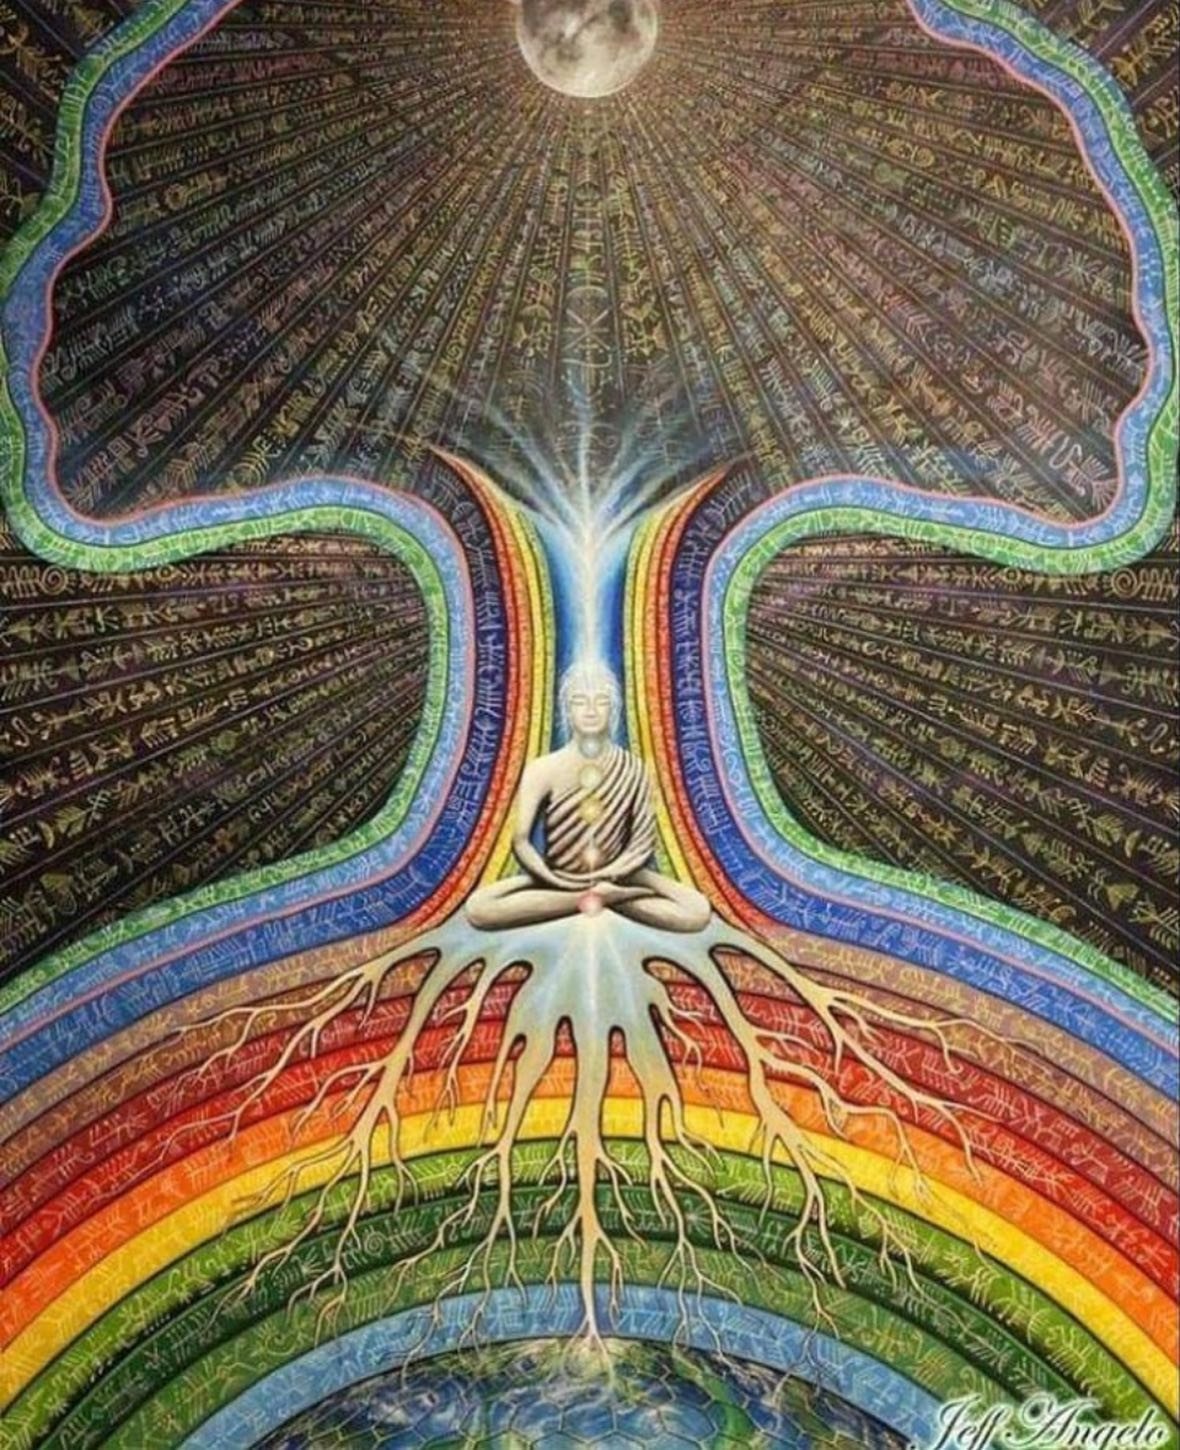 ✨
Rest Beloved One,
In knowing everything is Perfectly orchestrated 
You are being spiritually guided 
Towards your Divine Purpose
YOU have put in the Work
Your Heart has grown so much 
Your strength can be felt by all
You have come to THIS MOMENT
Ta